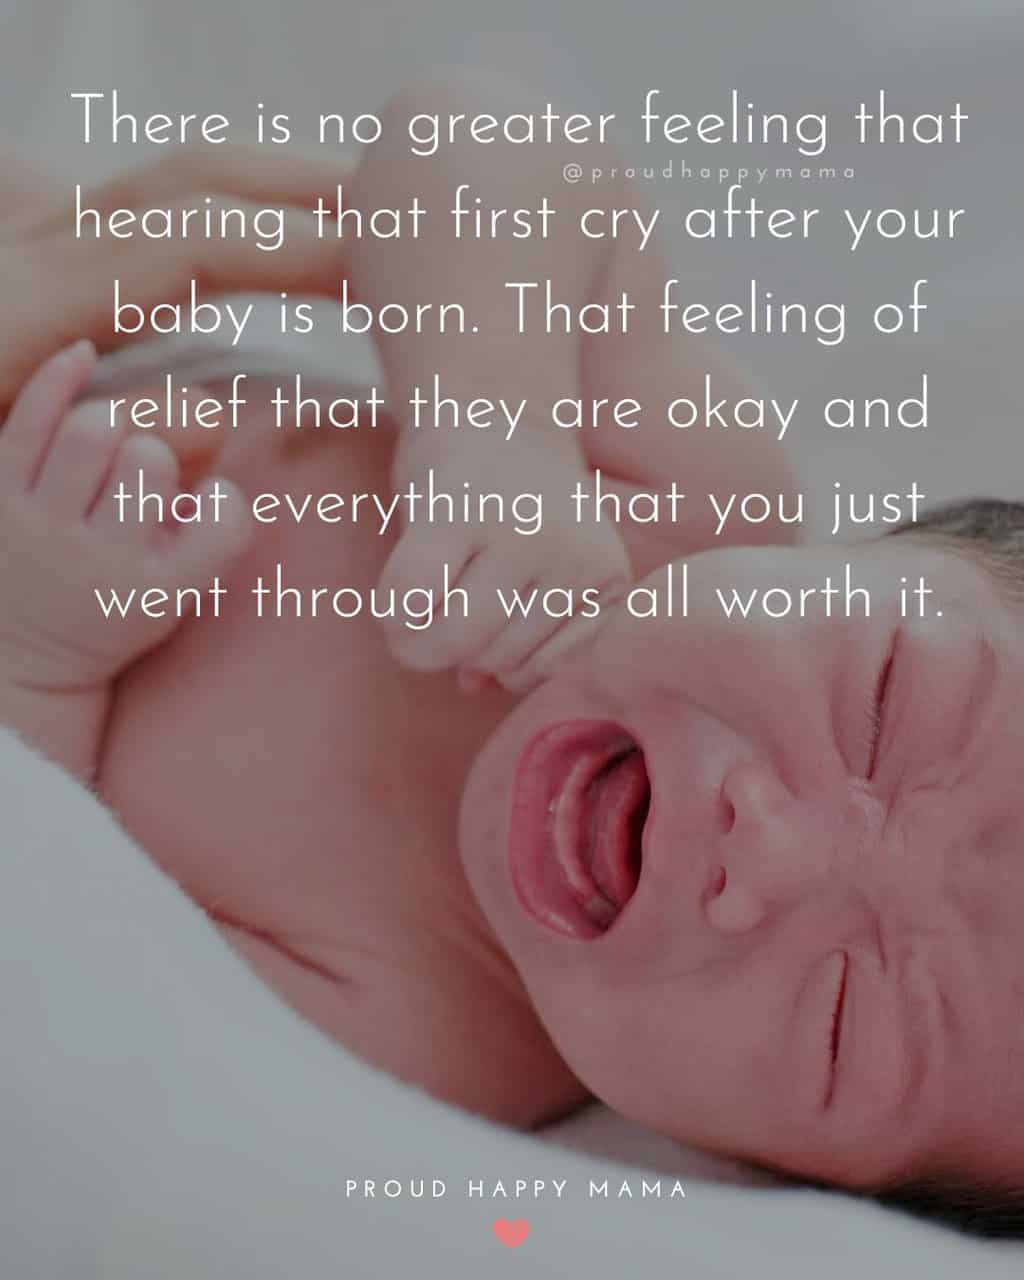 Mom And Baby Quotes | There is no greater feeling that hearing that first cry after your baby is born. That feeling of relief that they are okay and that everything that you just went through was all worth it.